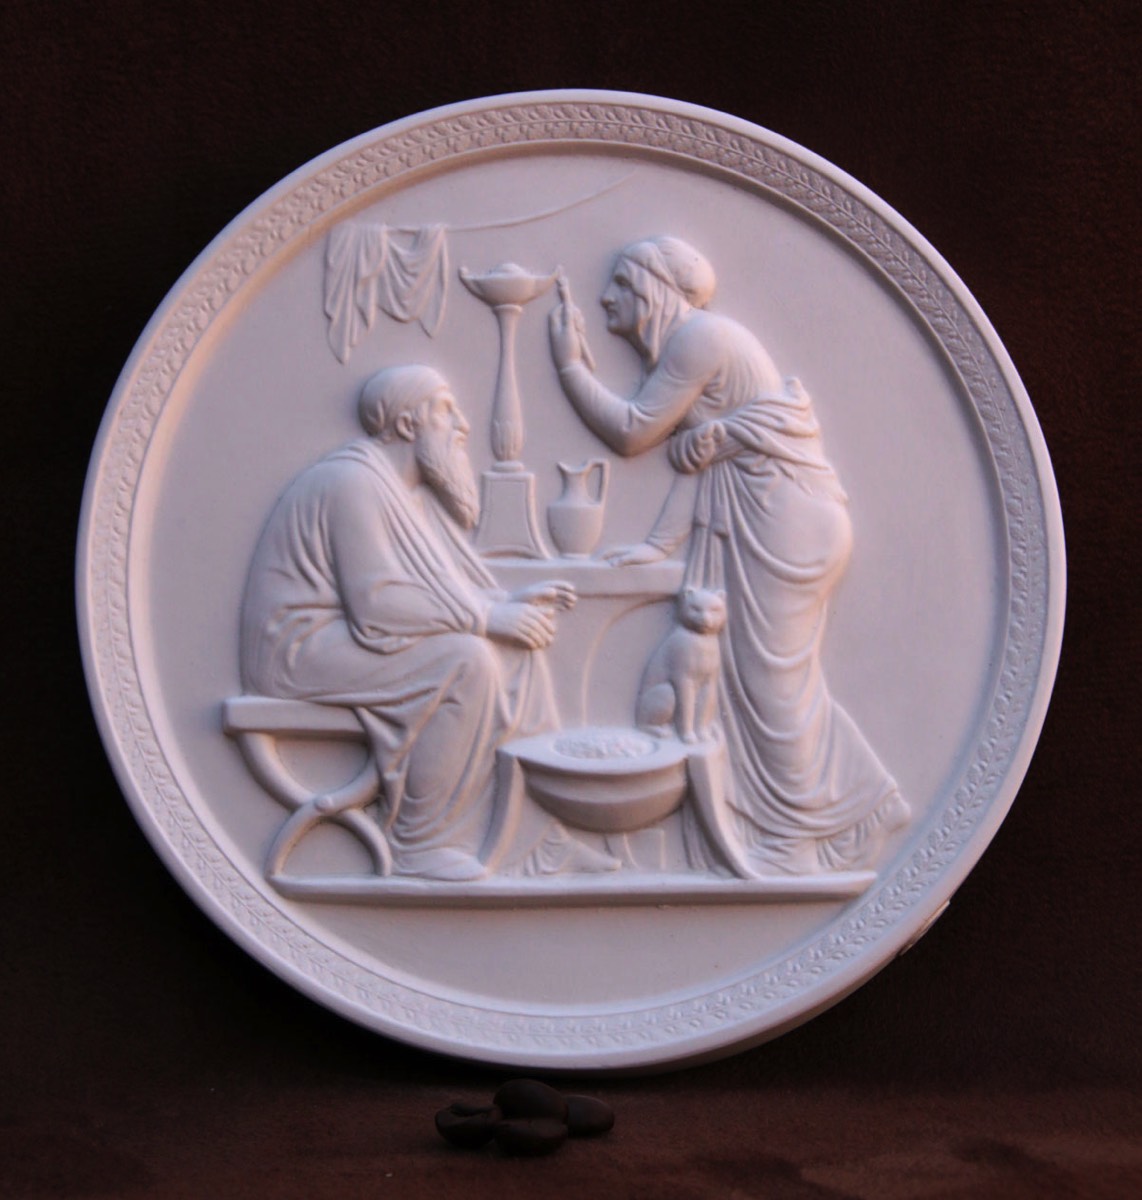 Old Age / Winter), handmade in plaster by the Modern Souvenir Company.